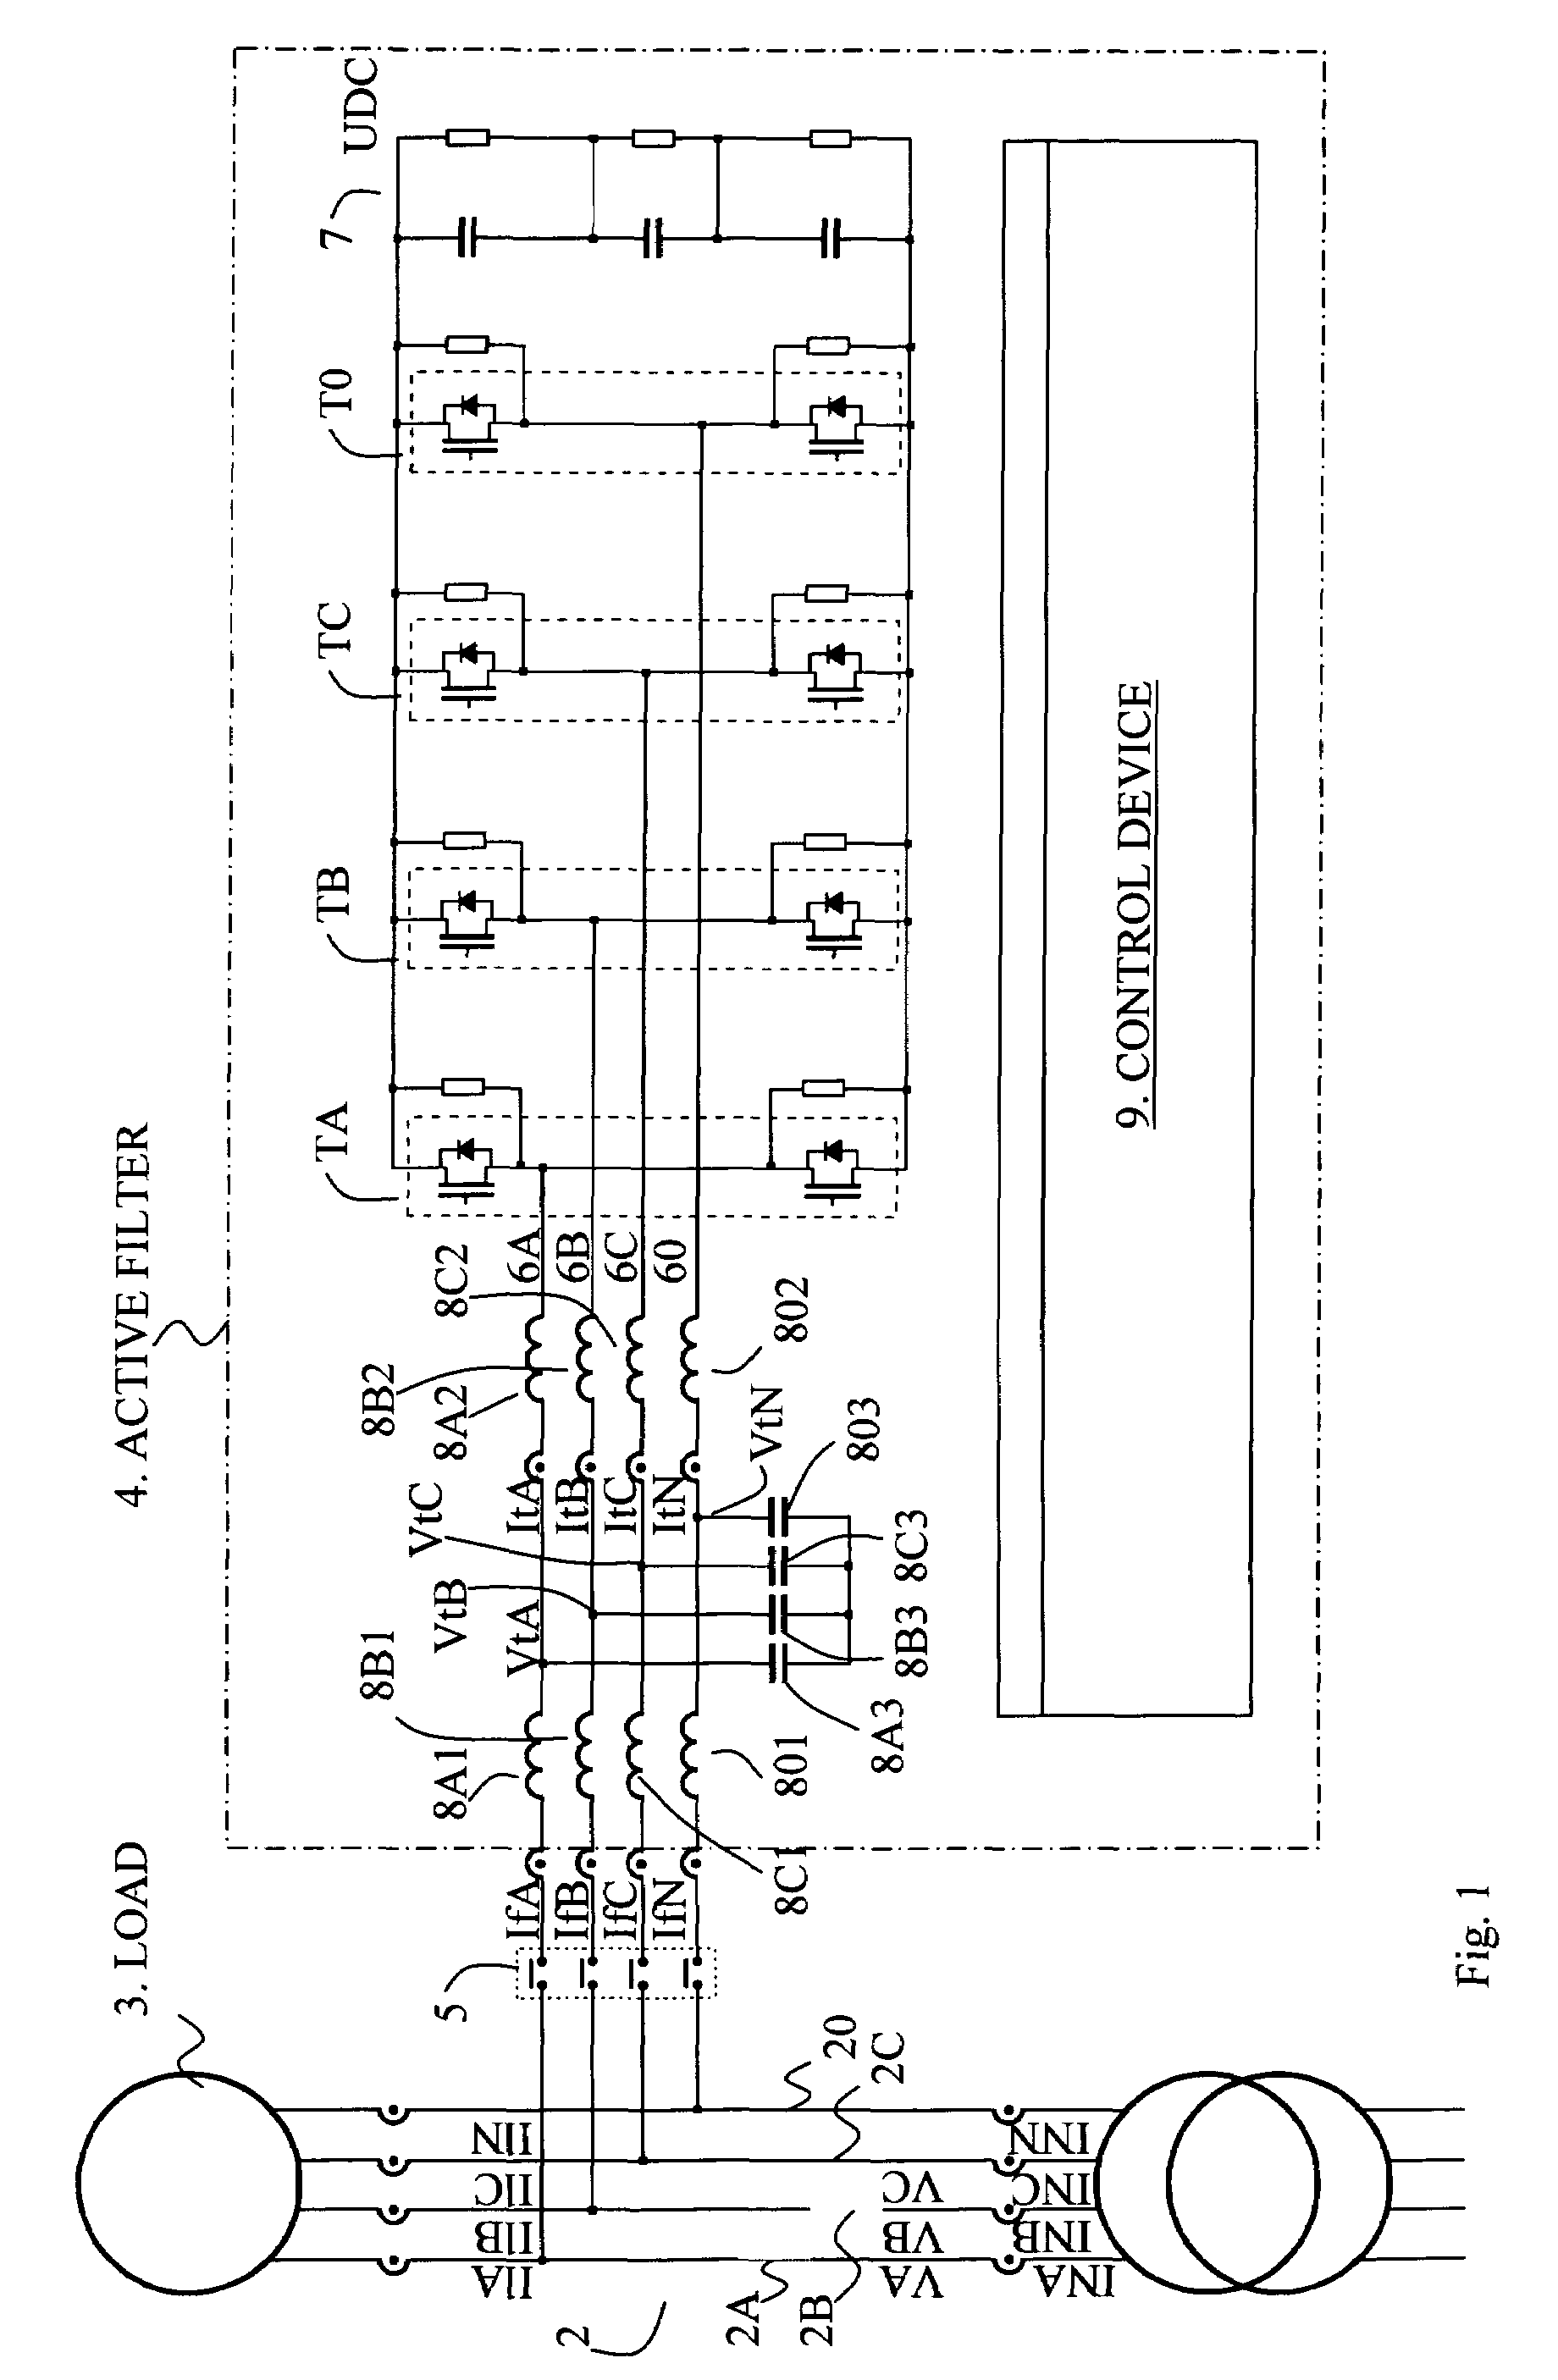 T-filter for reducing disturbances generated on a power grid by an active filter